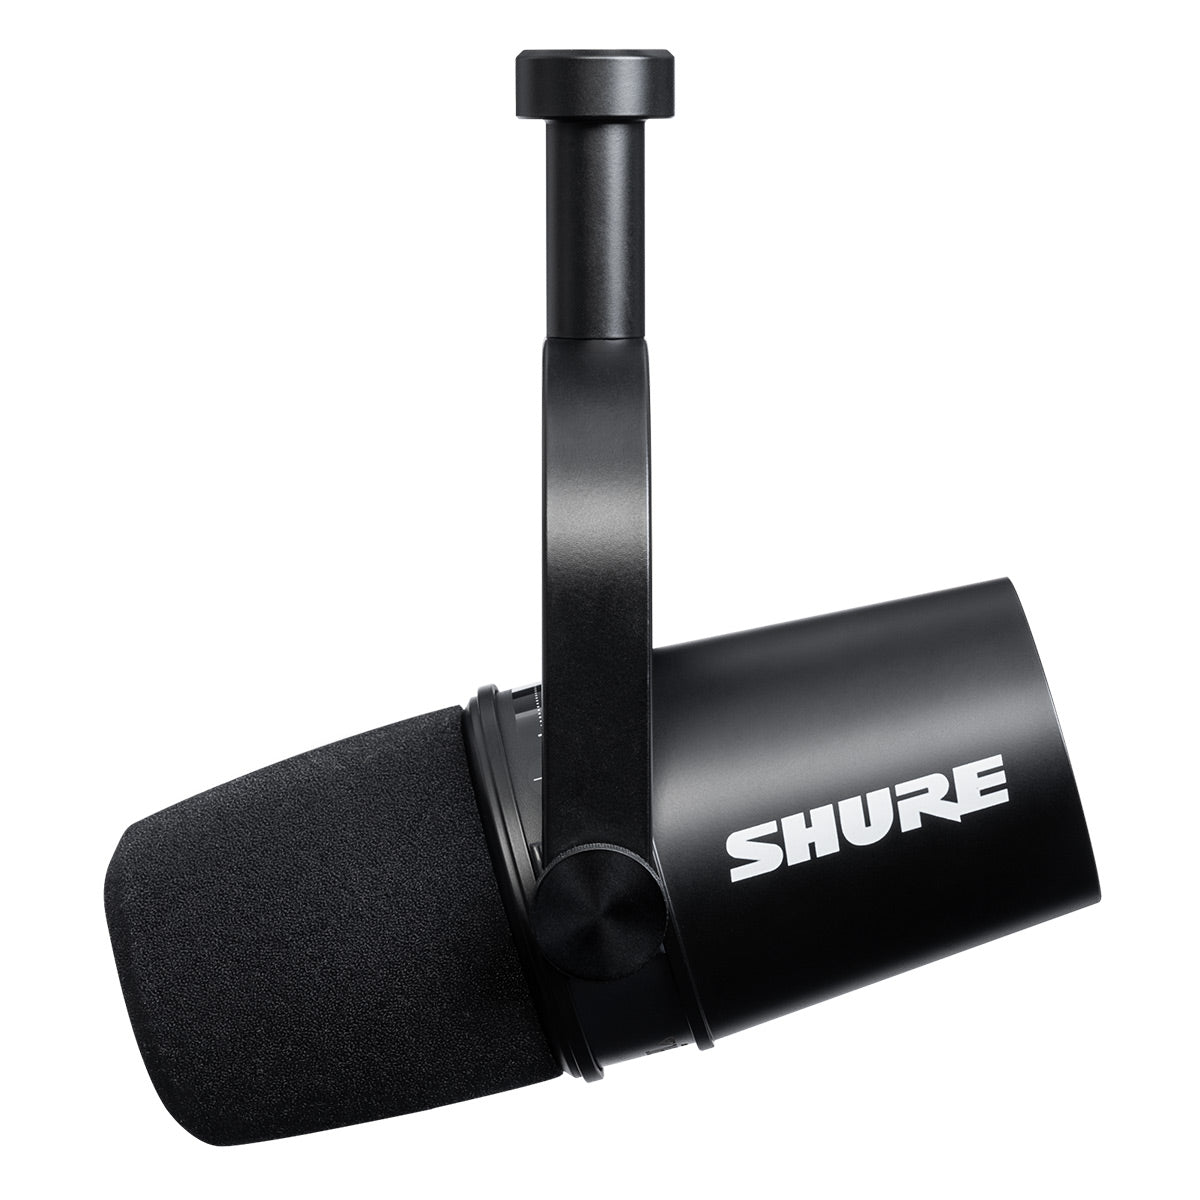 Shure MV7 USB/XLR Dynamic Microphone for Podcasting, Recording, Live Streaming & Gaming with Built-in Headphone Output (Black)